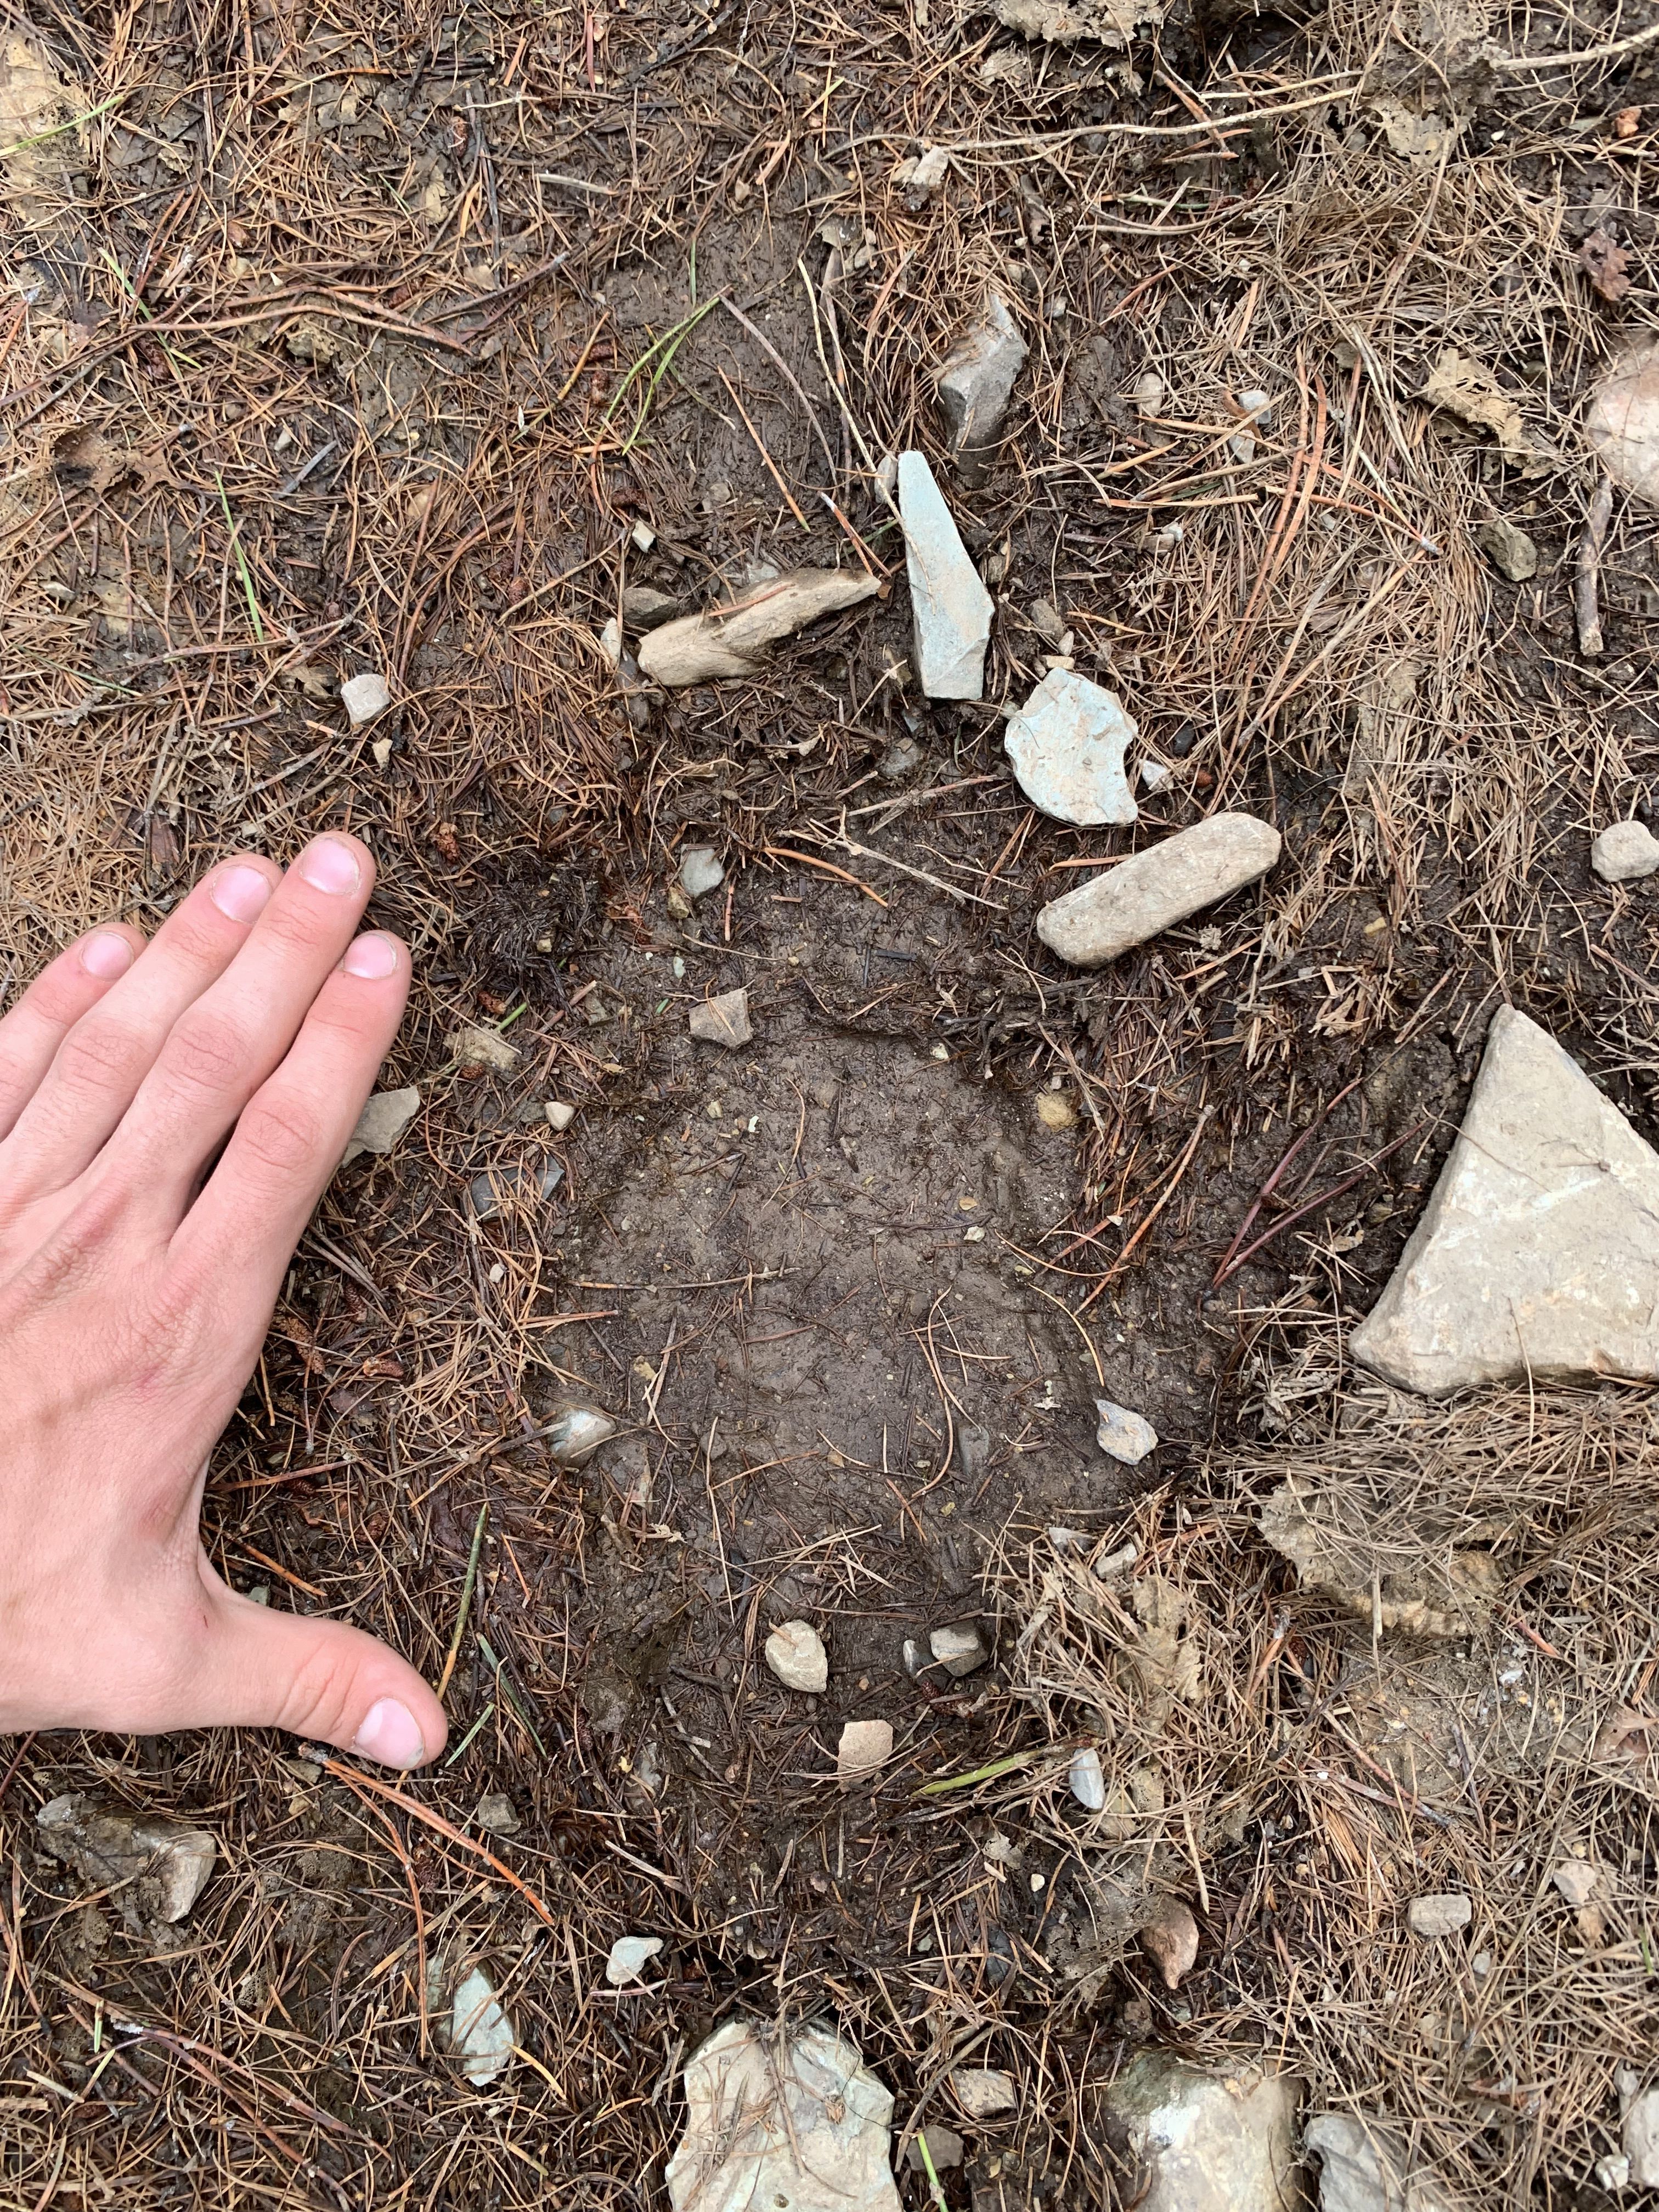 A hand is touching the ground, with a bear paw print next to it.